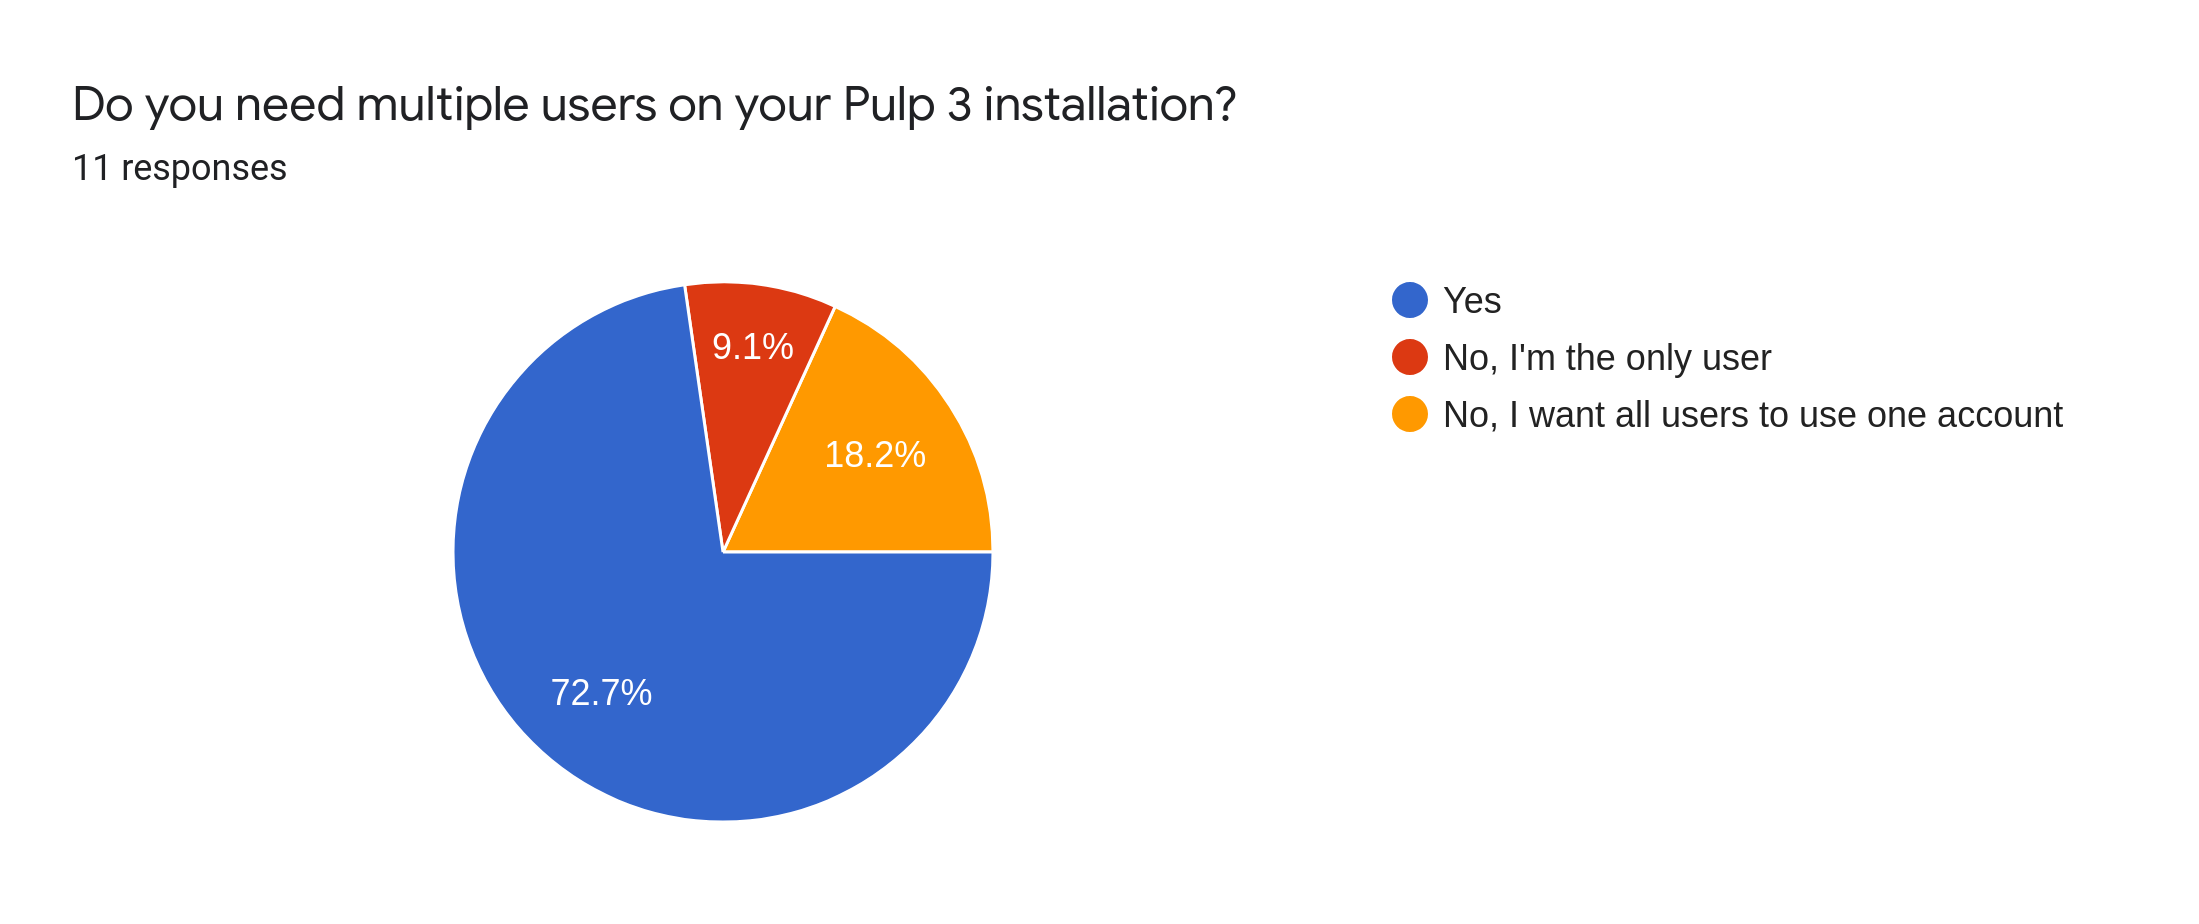 Do you need multiple users on your Pulp 3 installation?